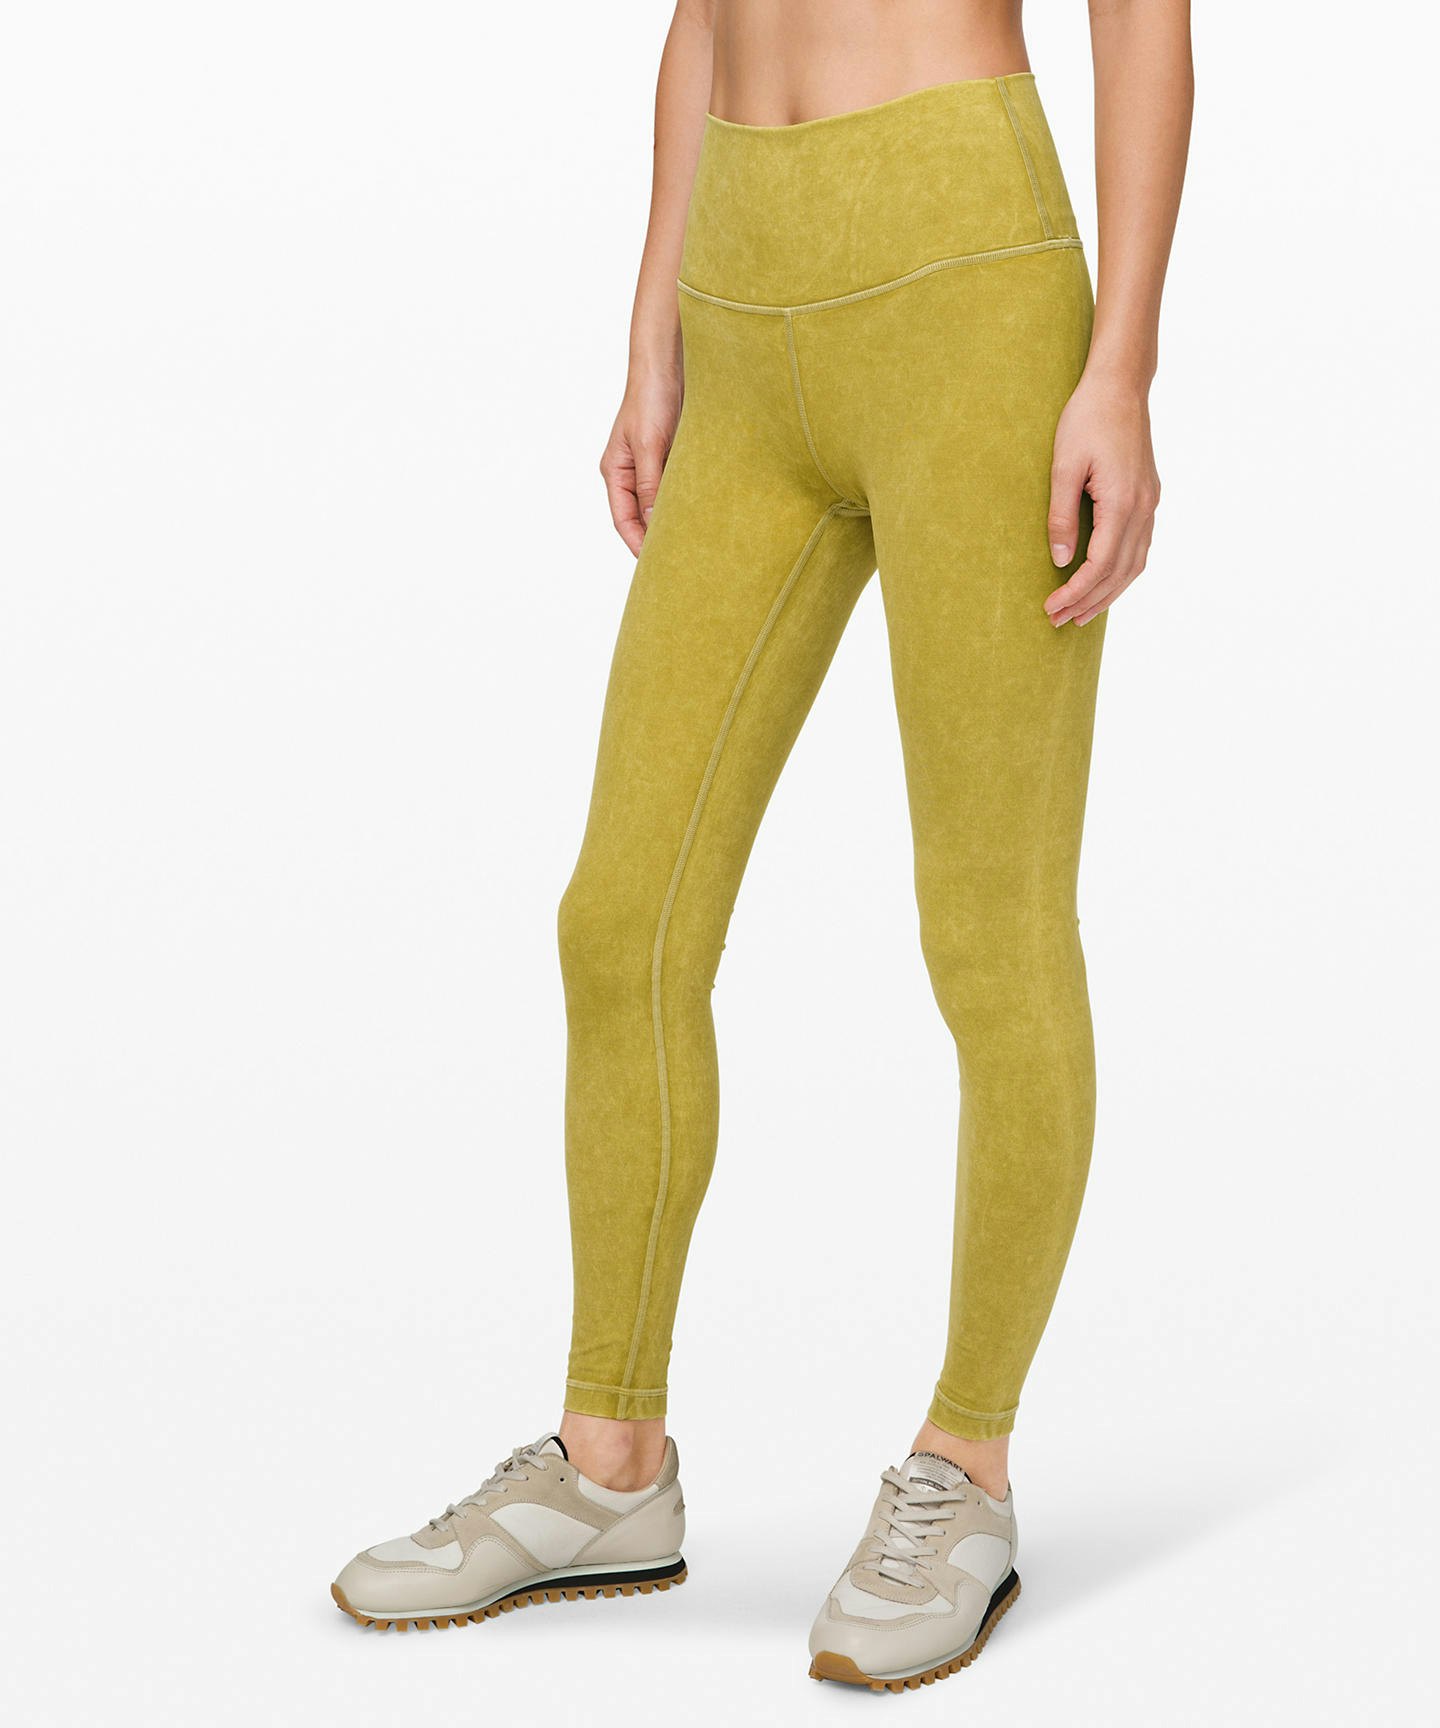 Where Are Lululemon Leggings Manufactured In Usa